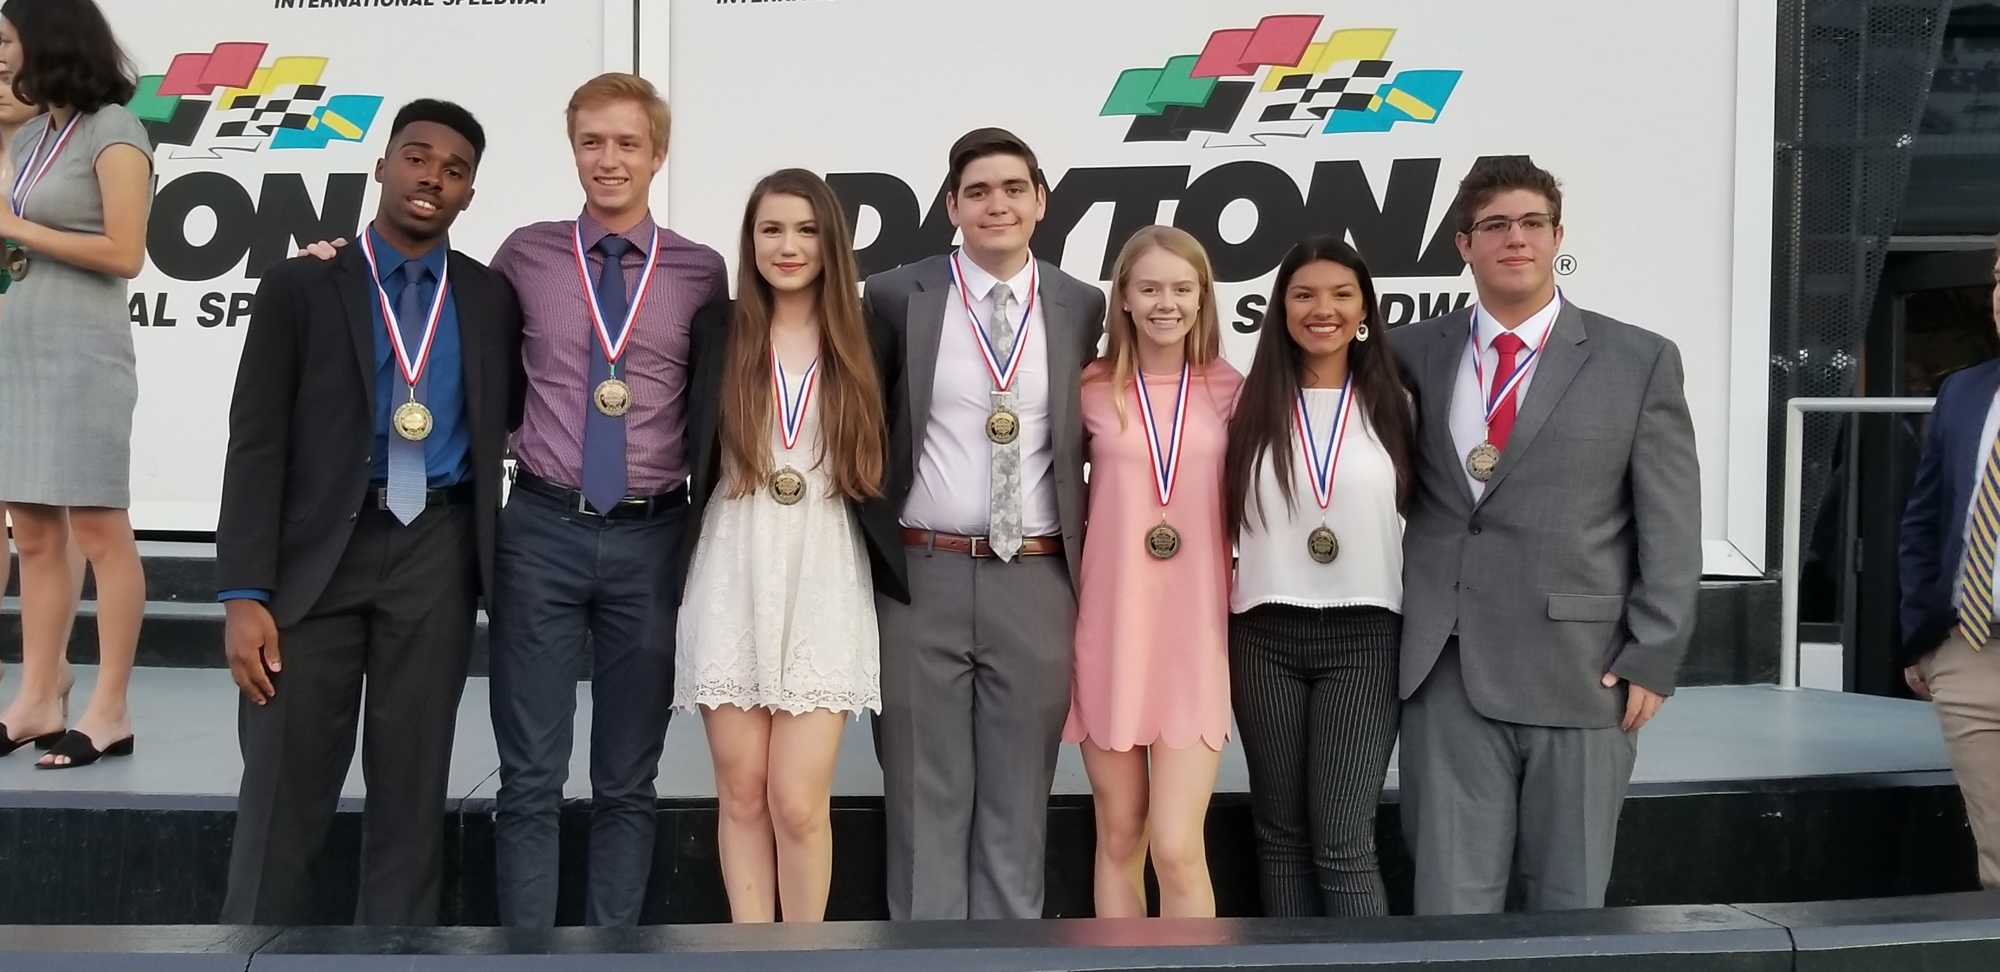 The News Journal's Medallion of Excellence recipients from FPC were Wanyea Barbael, Igor Sokolov, Daniella Sbordone and Tyler Perry, and from MHS, the recipients were Haliey Balcom, Zoe Estberg and Patrick Argento.